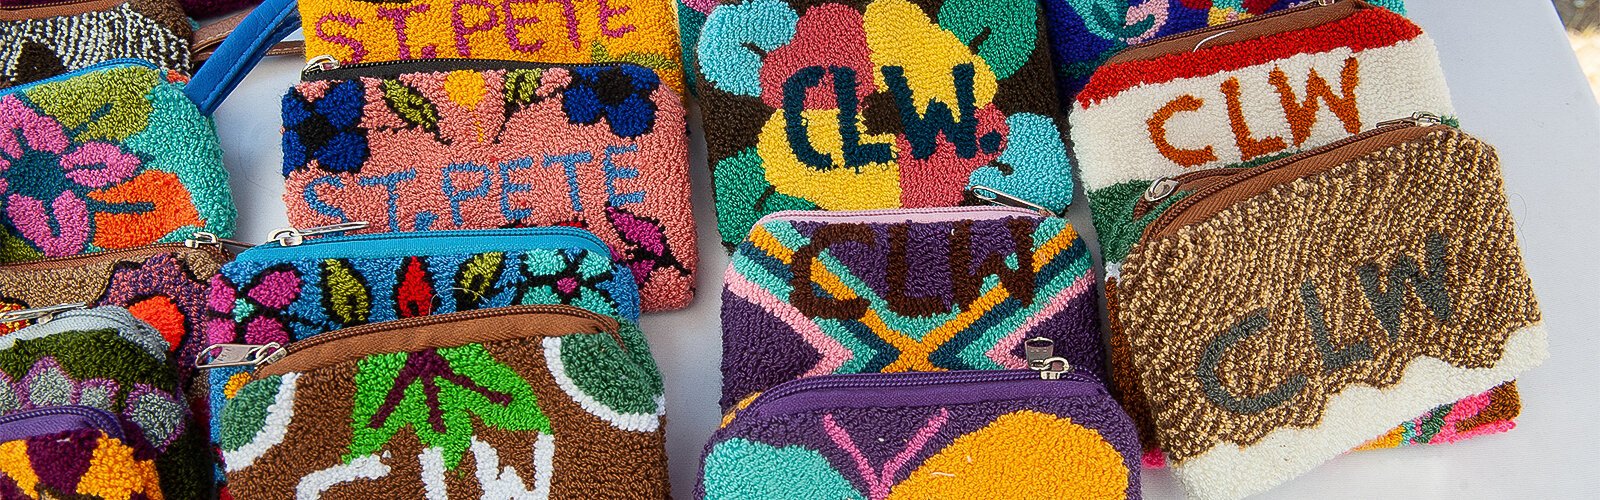 Colorful bags and accessories made by Claudia Leiva, Clearwater, are made in Talataa Columbia ethnic style representative of the Wayúu Tribe culture. The crafts were part of The Market Marie in Clearwater.